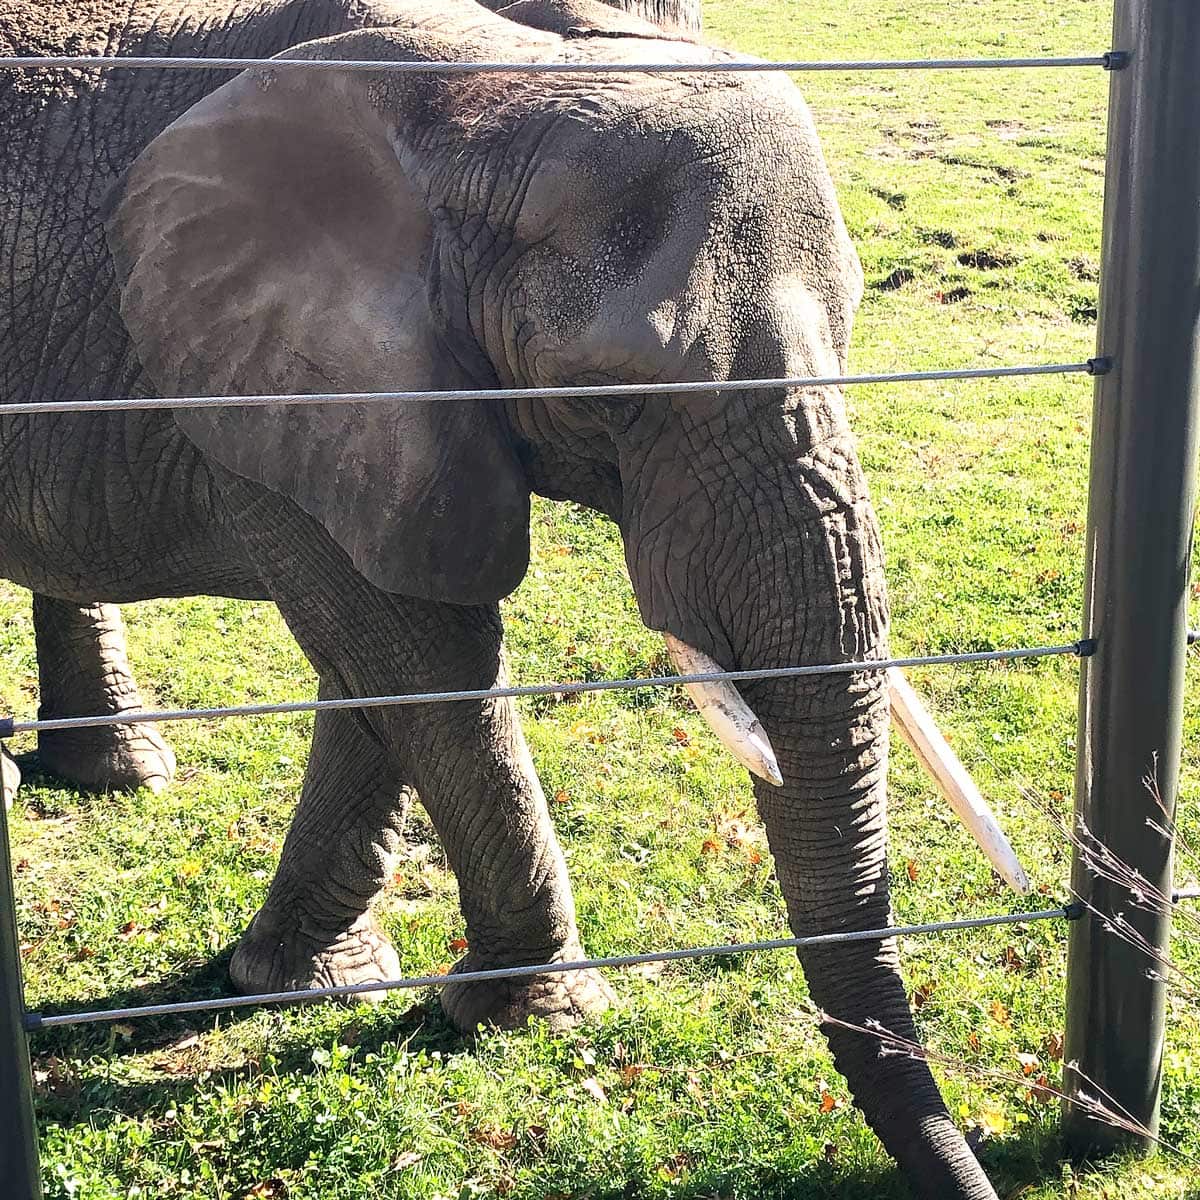 Life Is Sweet October 2019 - Up close with Ruth the elephant at MKE County Zoo.